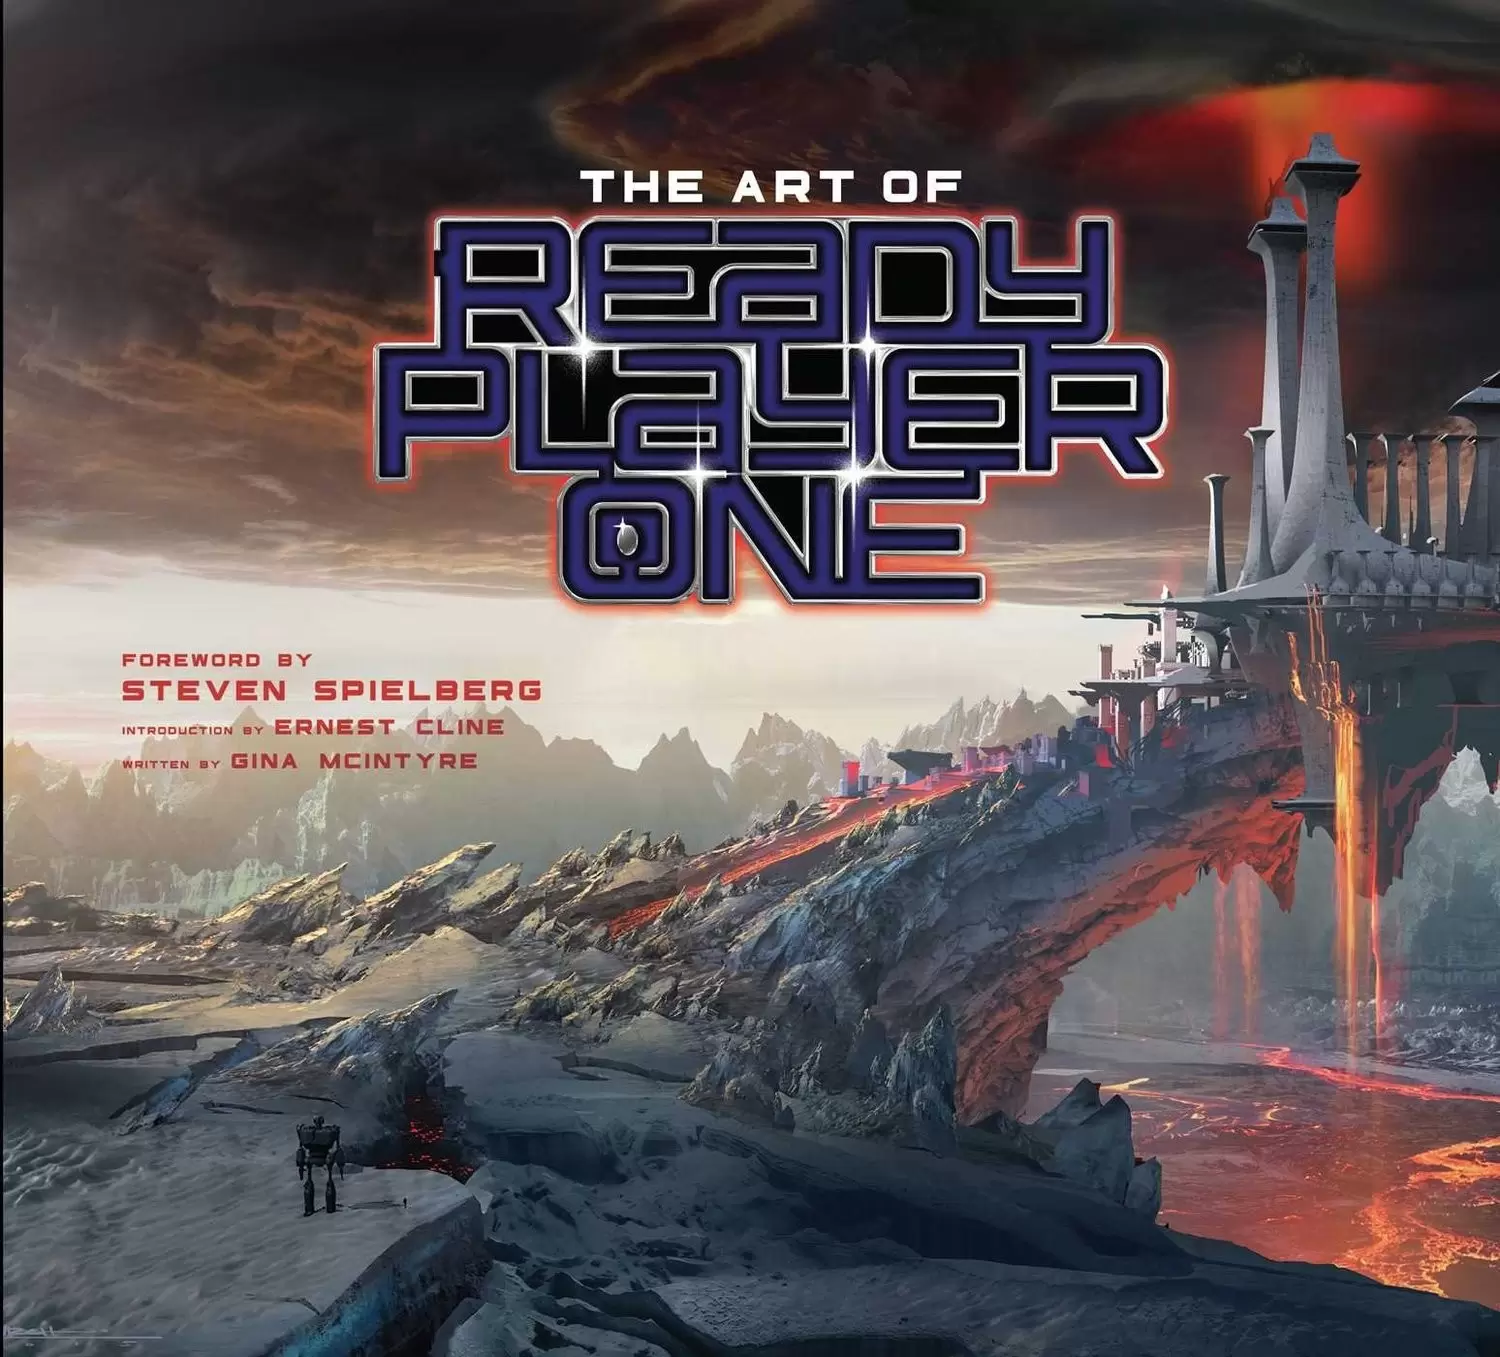 Cinéma - The Art of Ready Player One